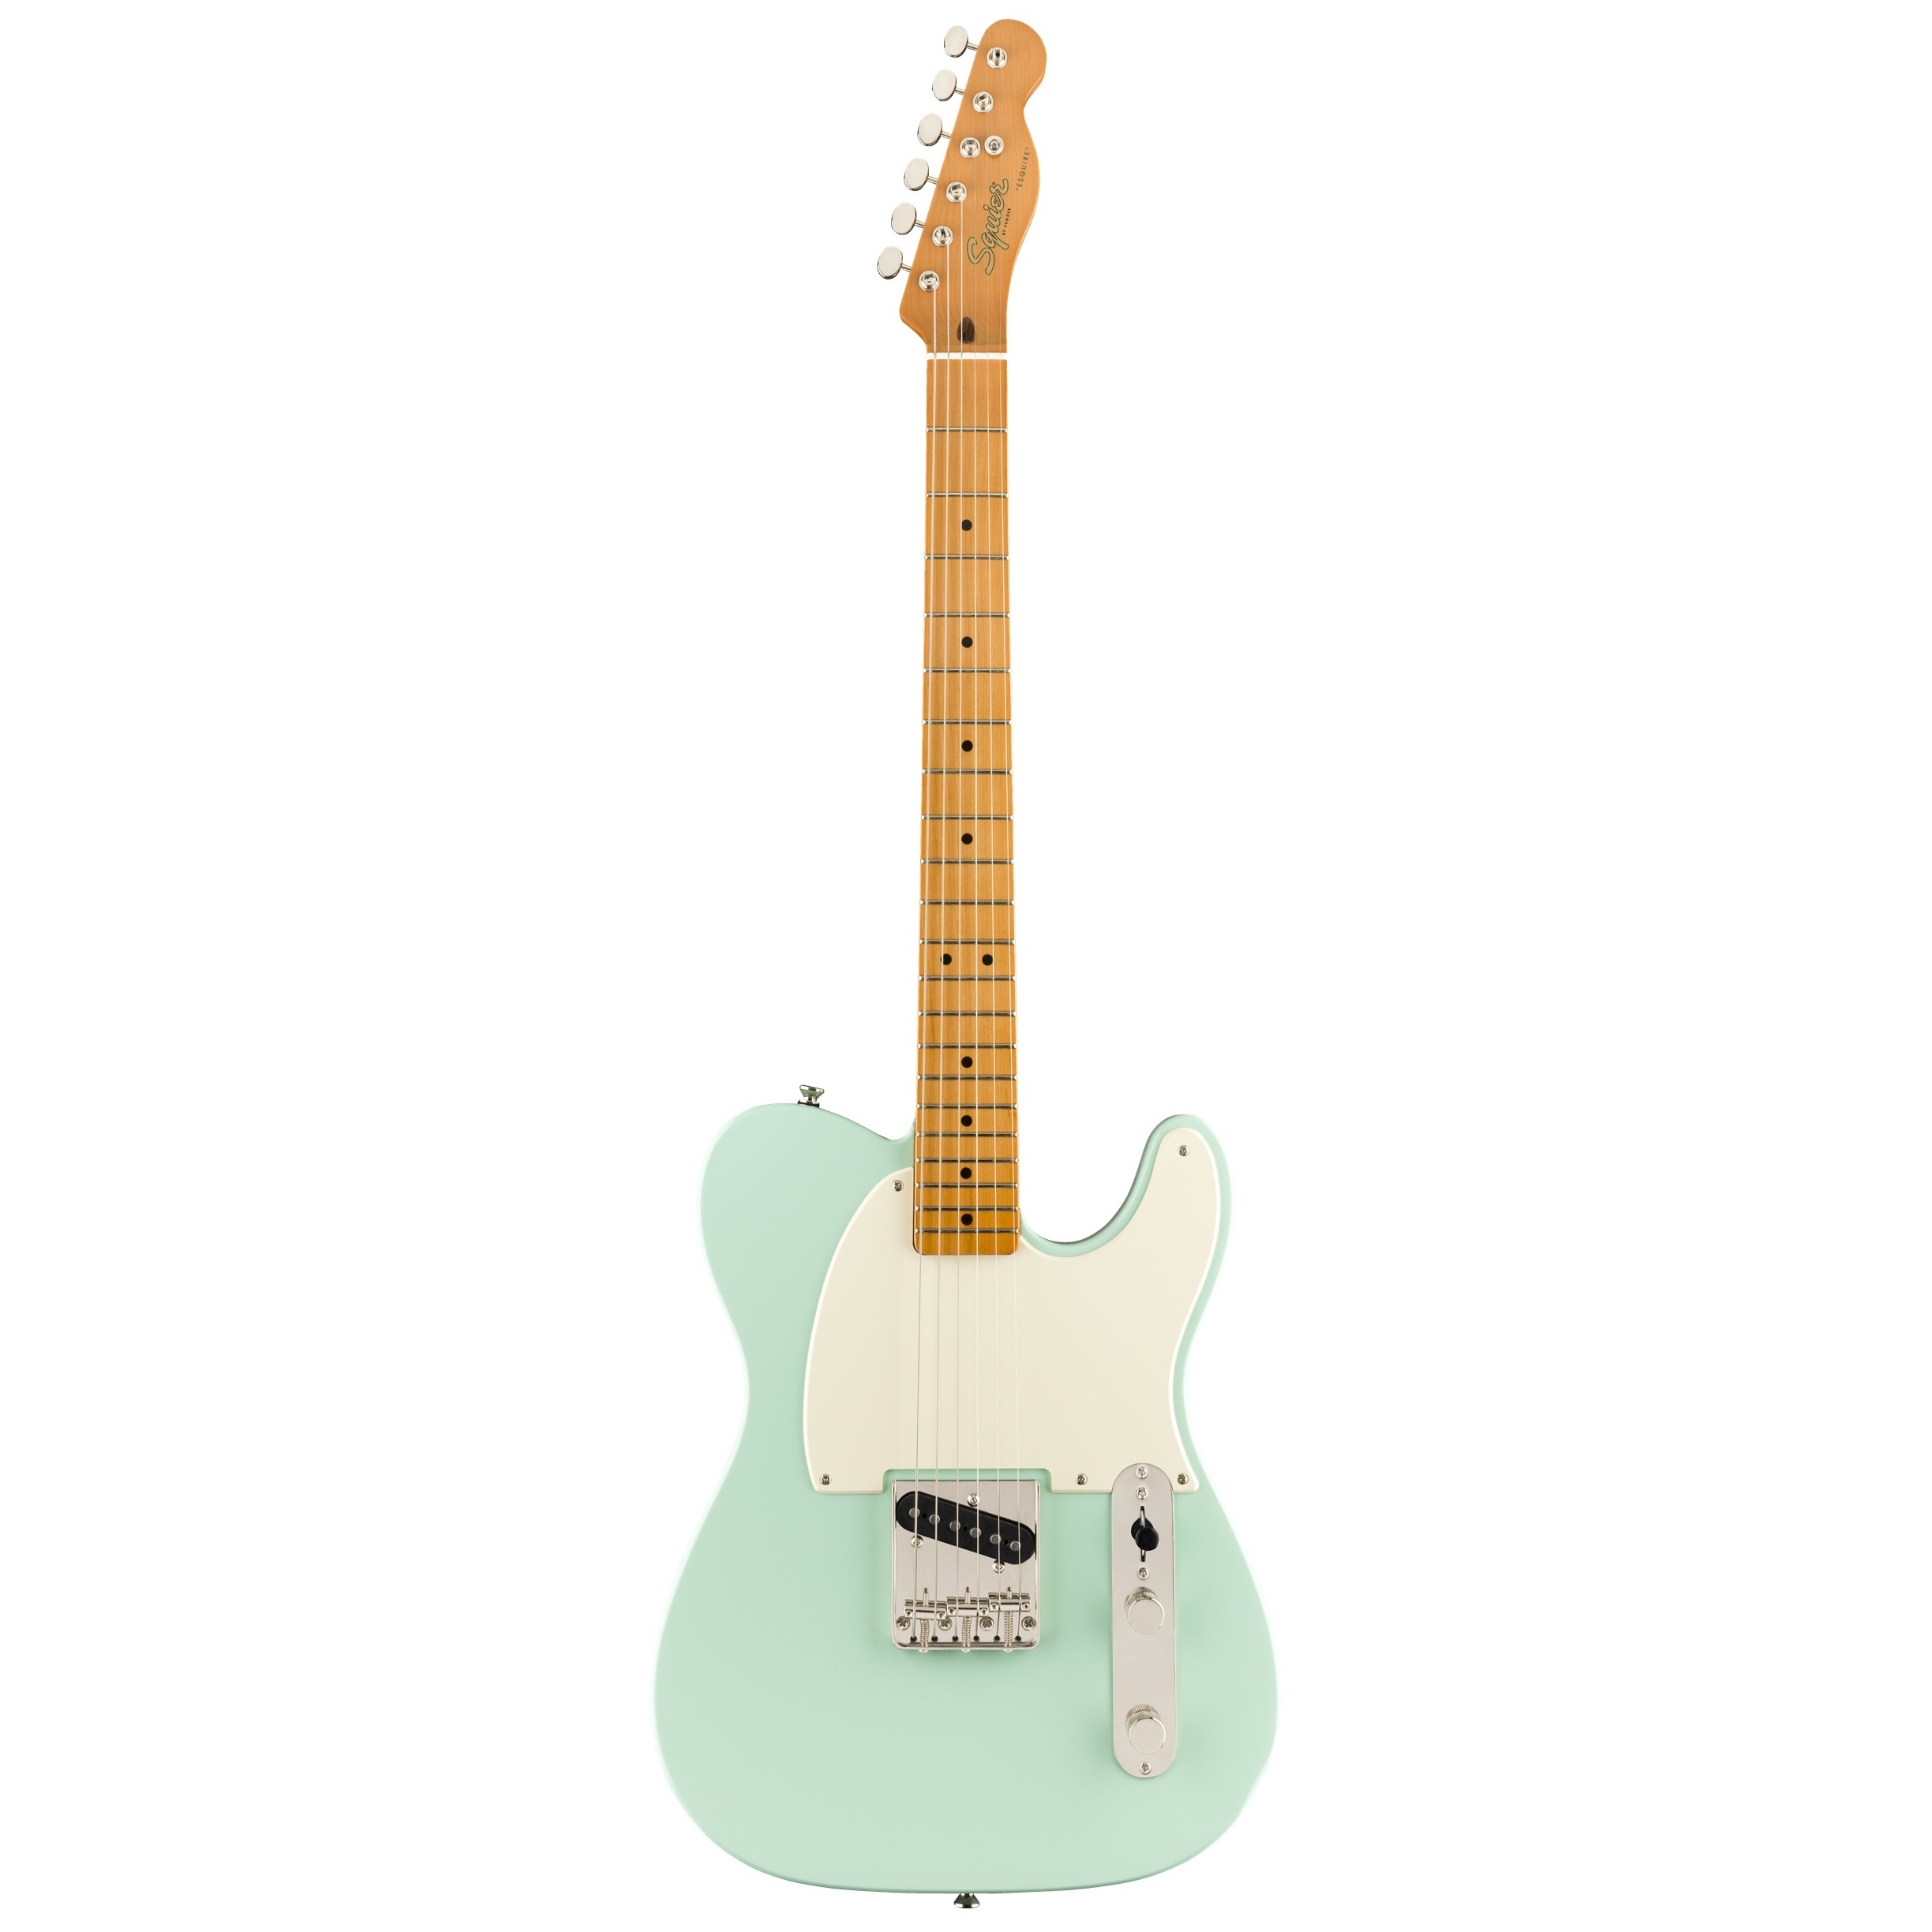 Squier by Fender LTD Classic Vibe 50s Esquire Surf Green B-Ware